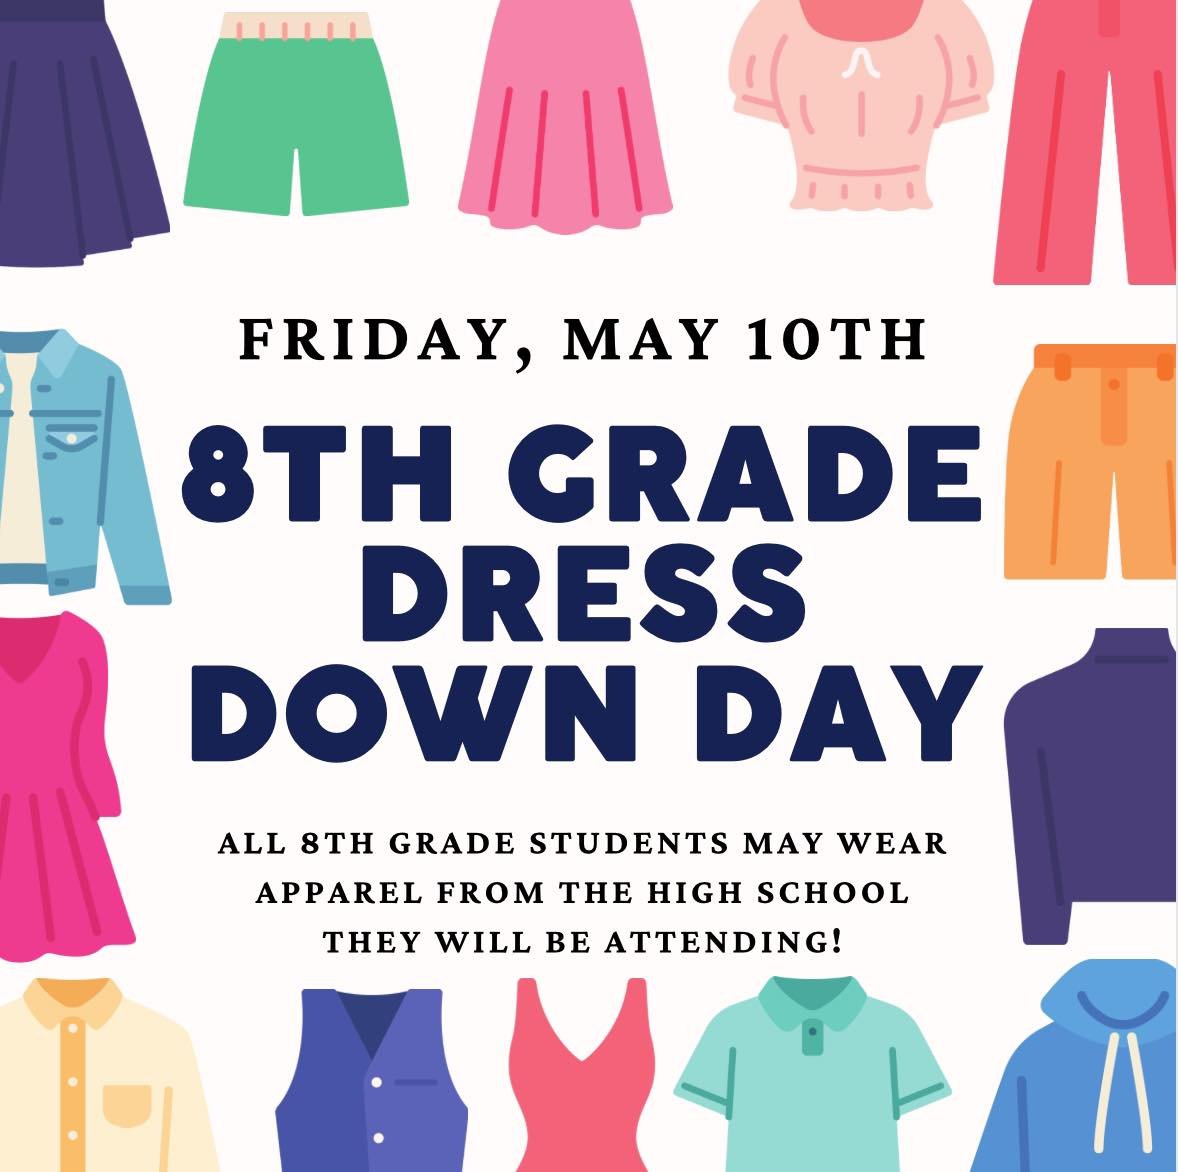 8th grade families: SAVE THE DATE 🗓️ 
Friday, May 10th is High School Dress Down Day! 

All 8th grade students can dress down this Friday and wear apparel from the High School they will be attending next school year!

If your 8th grader is not parti